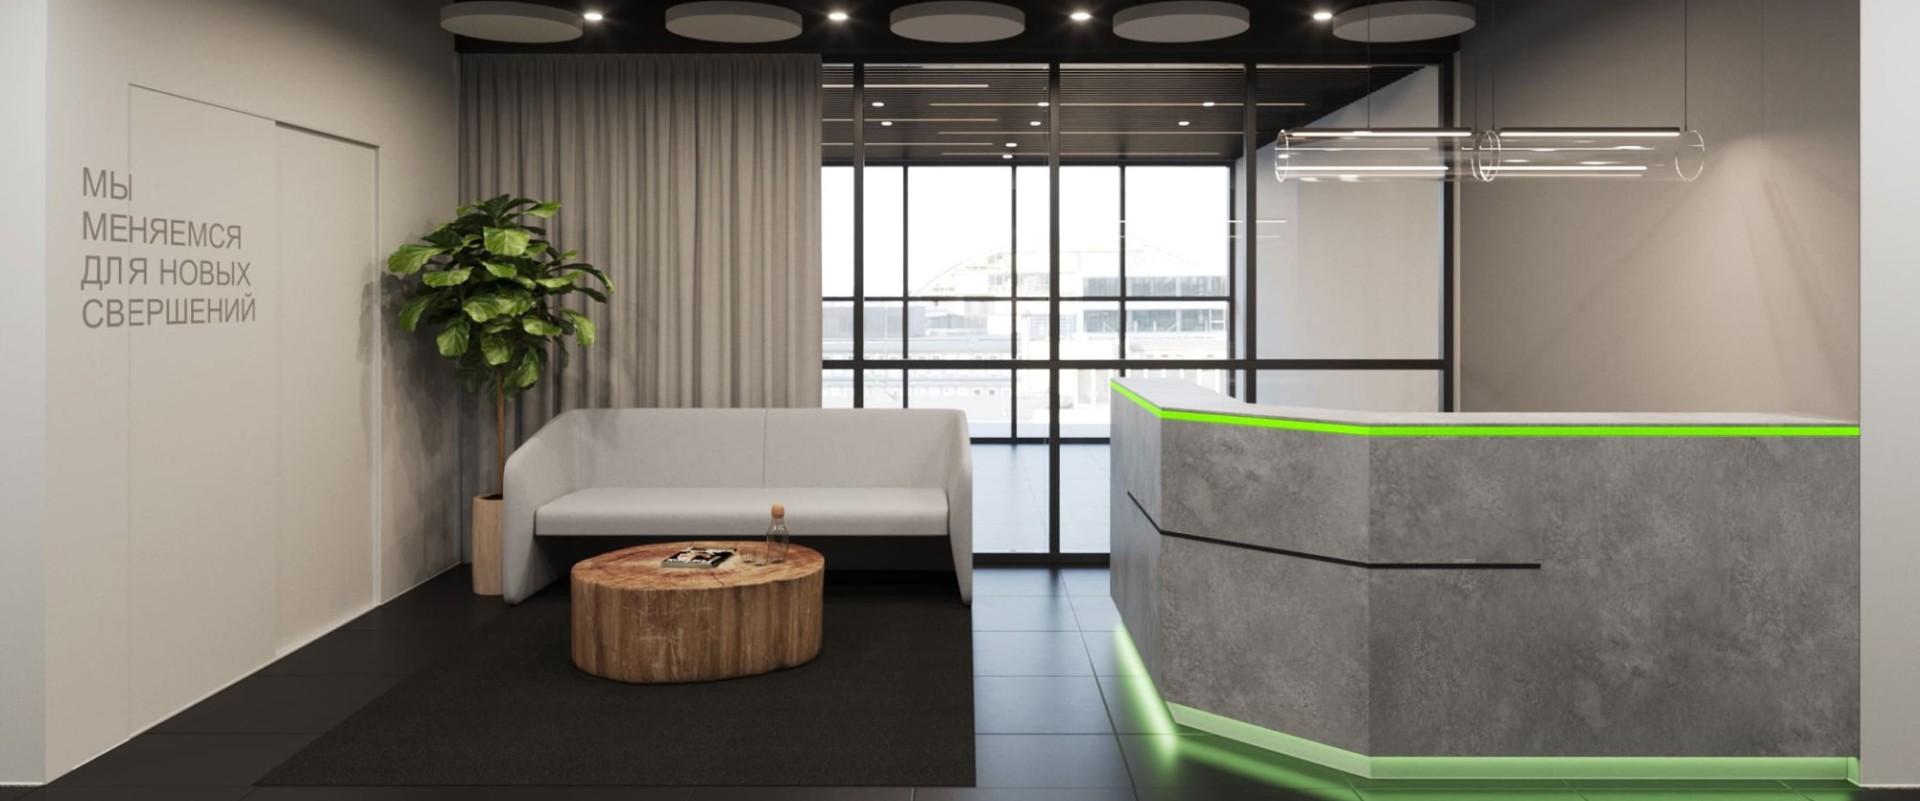 Office design for a logistics company transporting oil products: how to reflect “green” focus and safety in interior design 